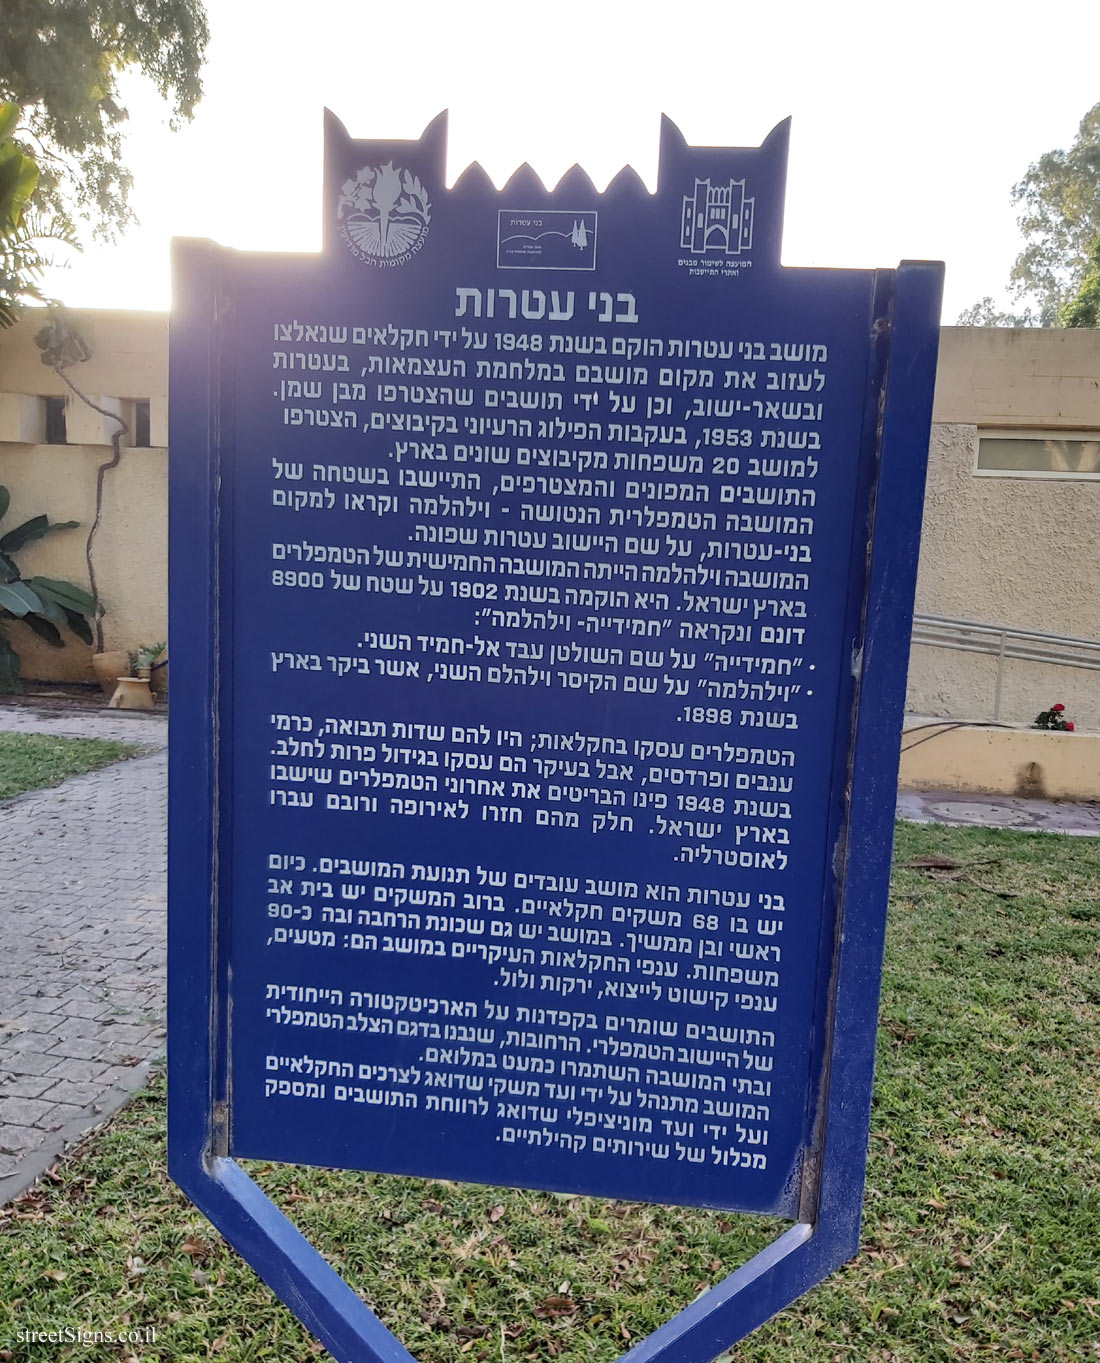 Bnei Atarot - Heritage Sites in Israel - About the Moshav